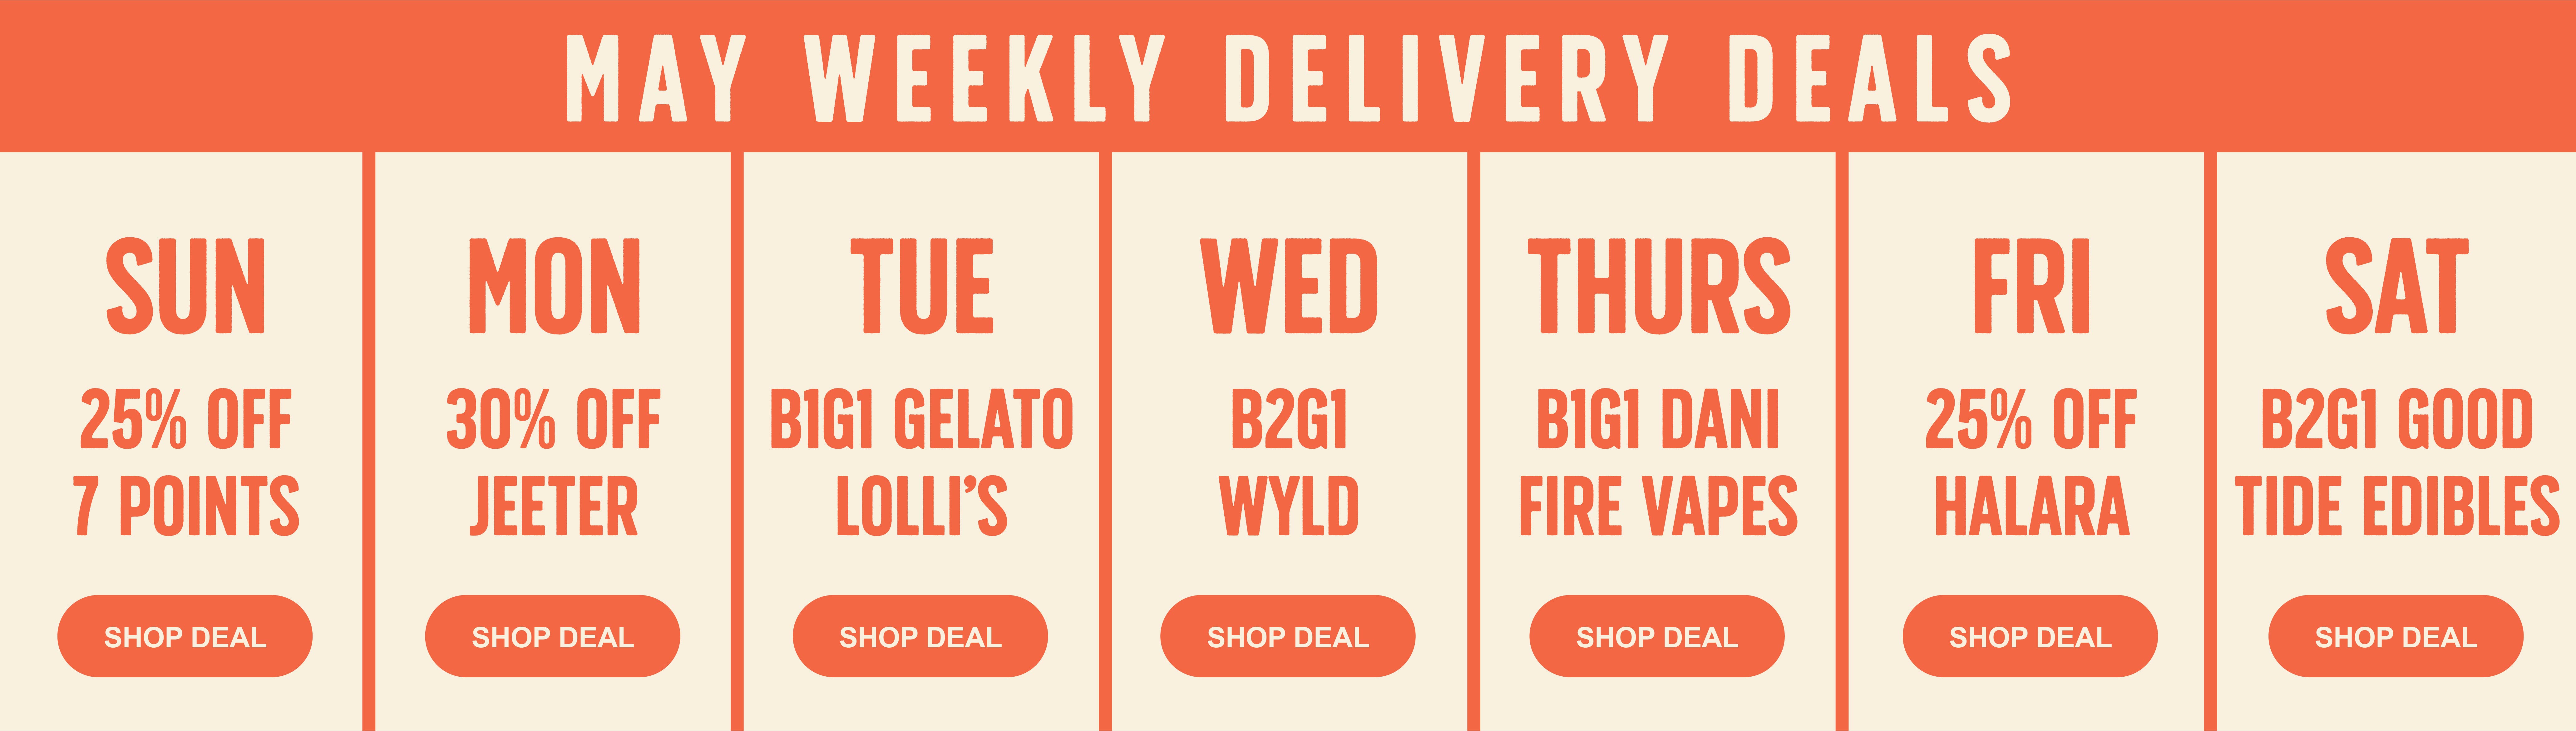 7 Points Delivery Deals